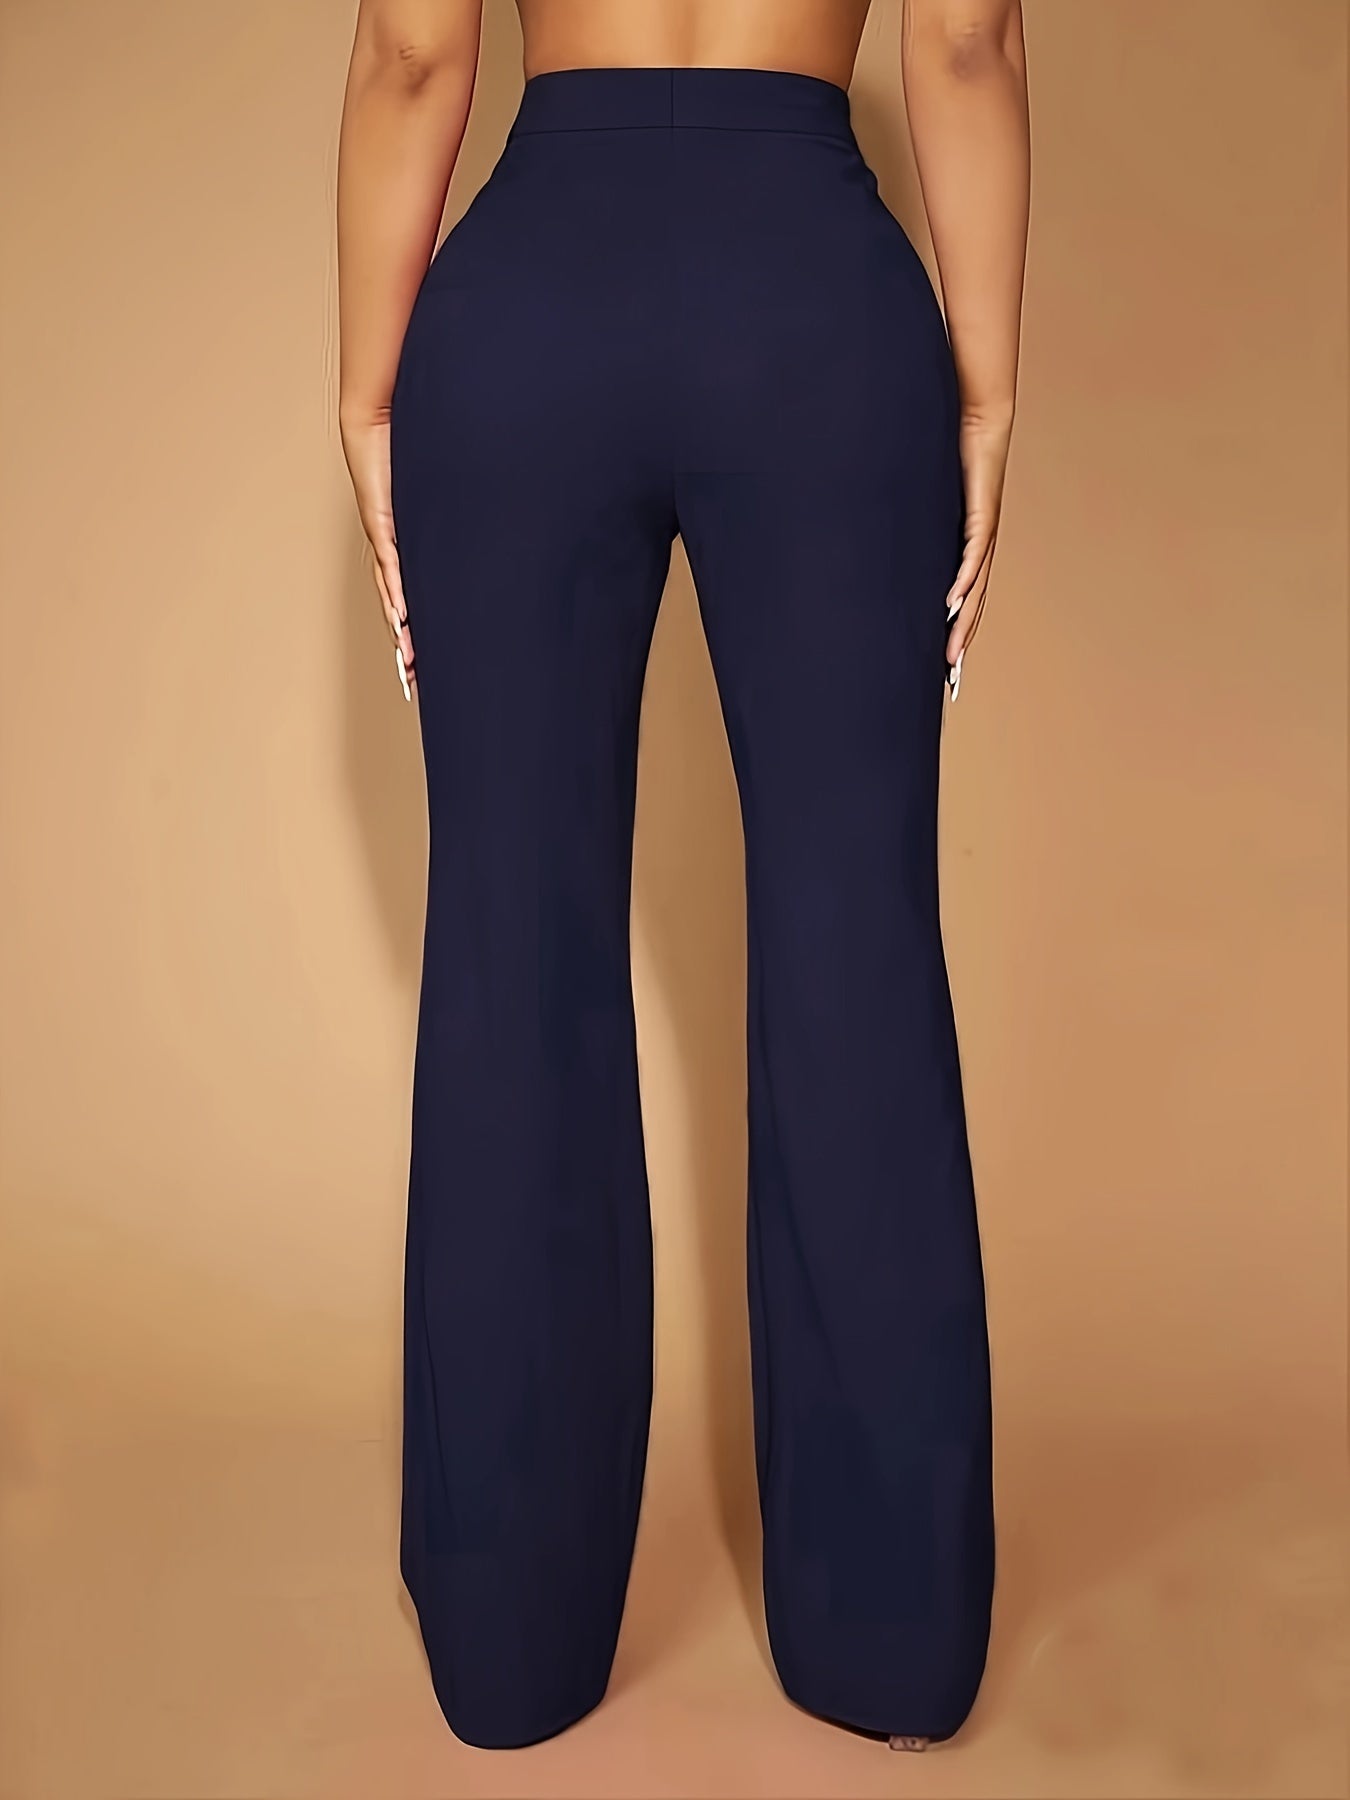 Solid High Waist Slim Pants, Casual Flare Leg Pants For Spring & Fall, Women's Clothing